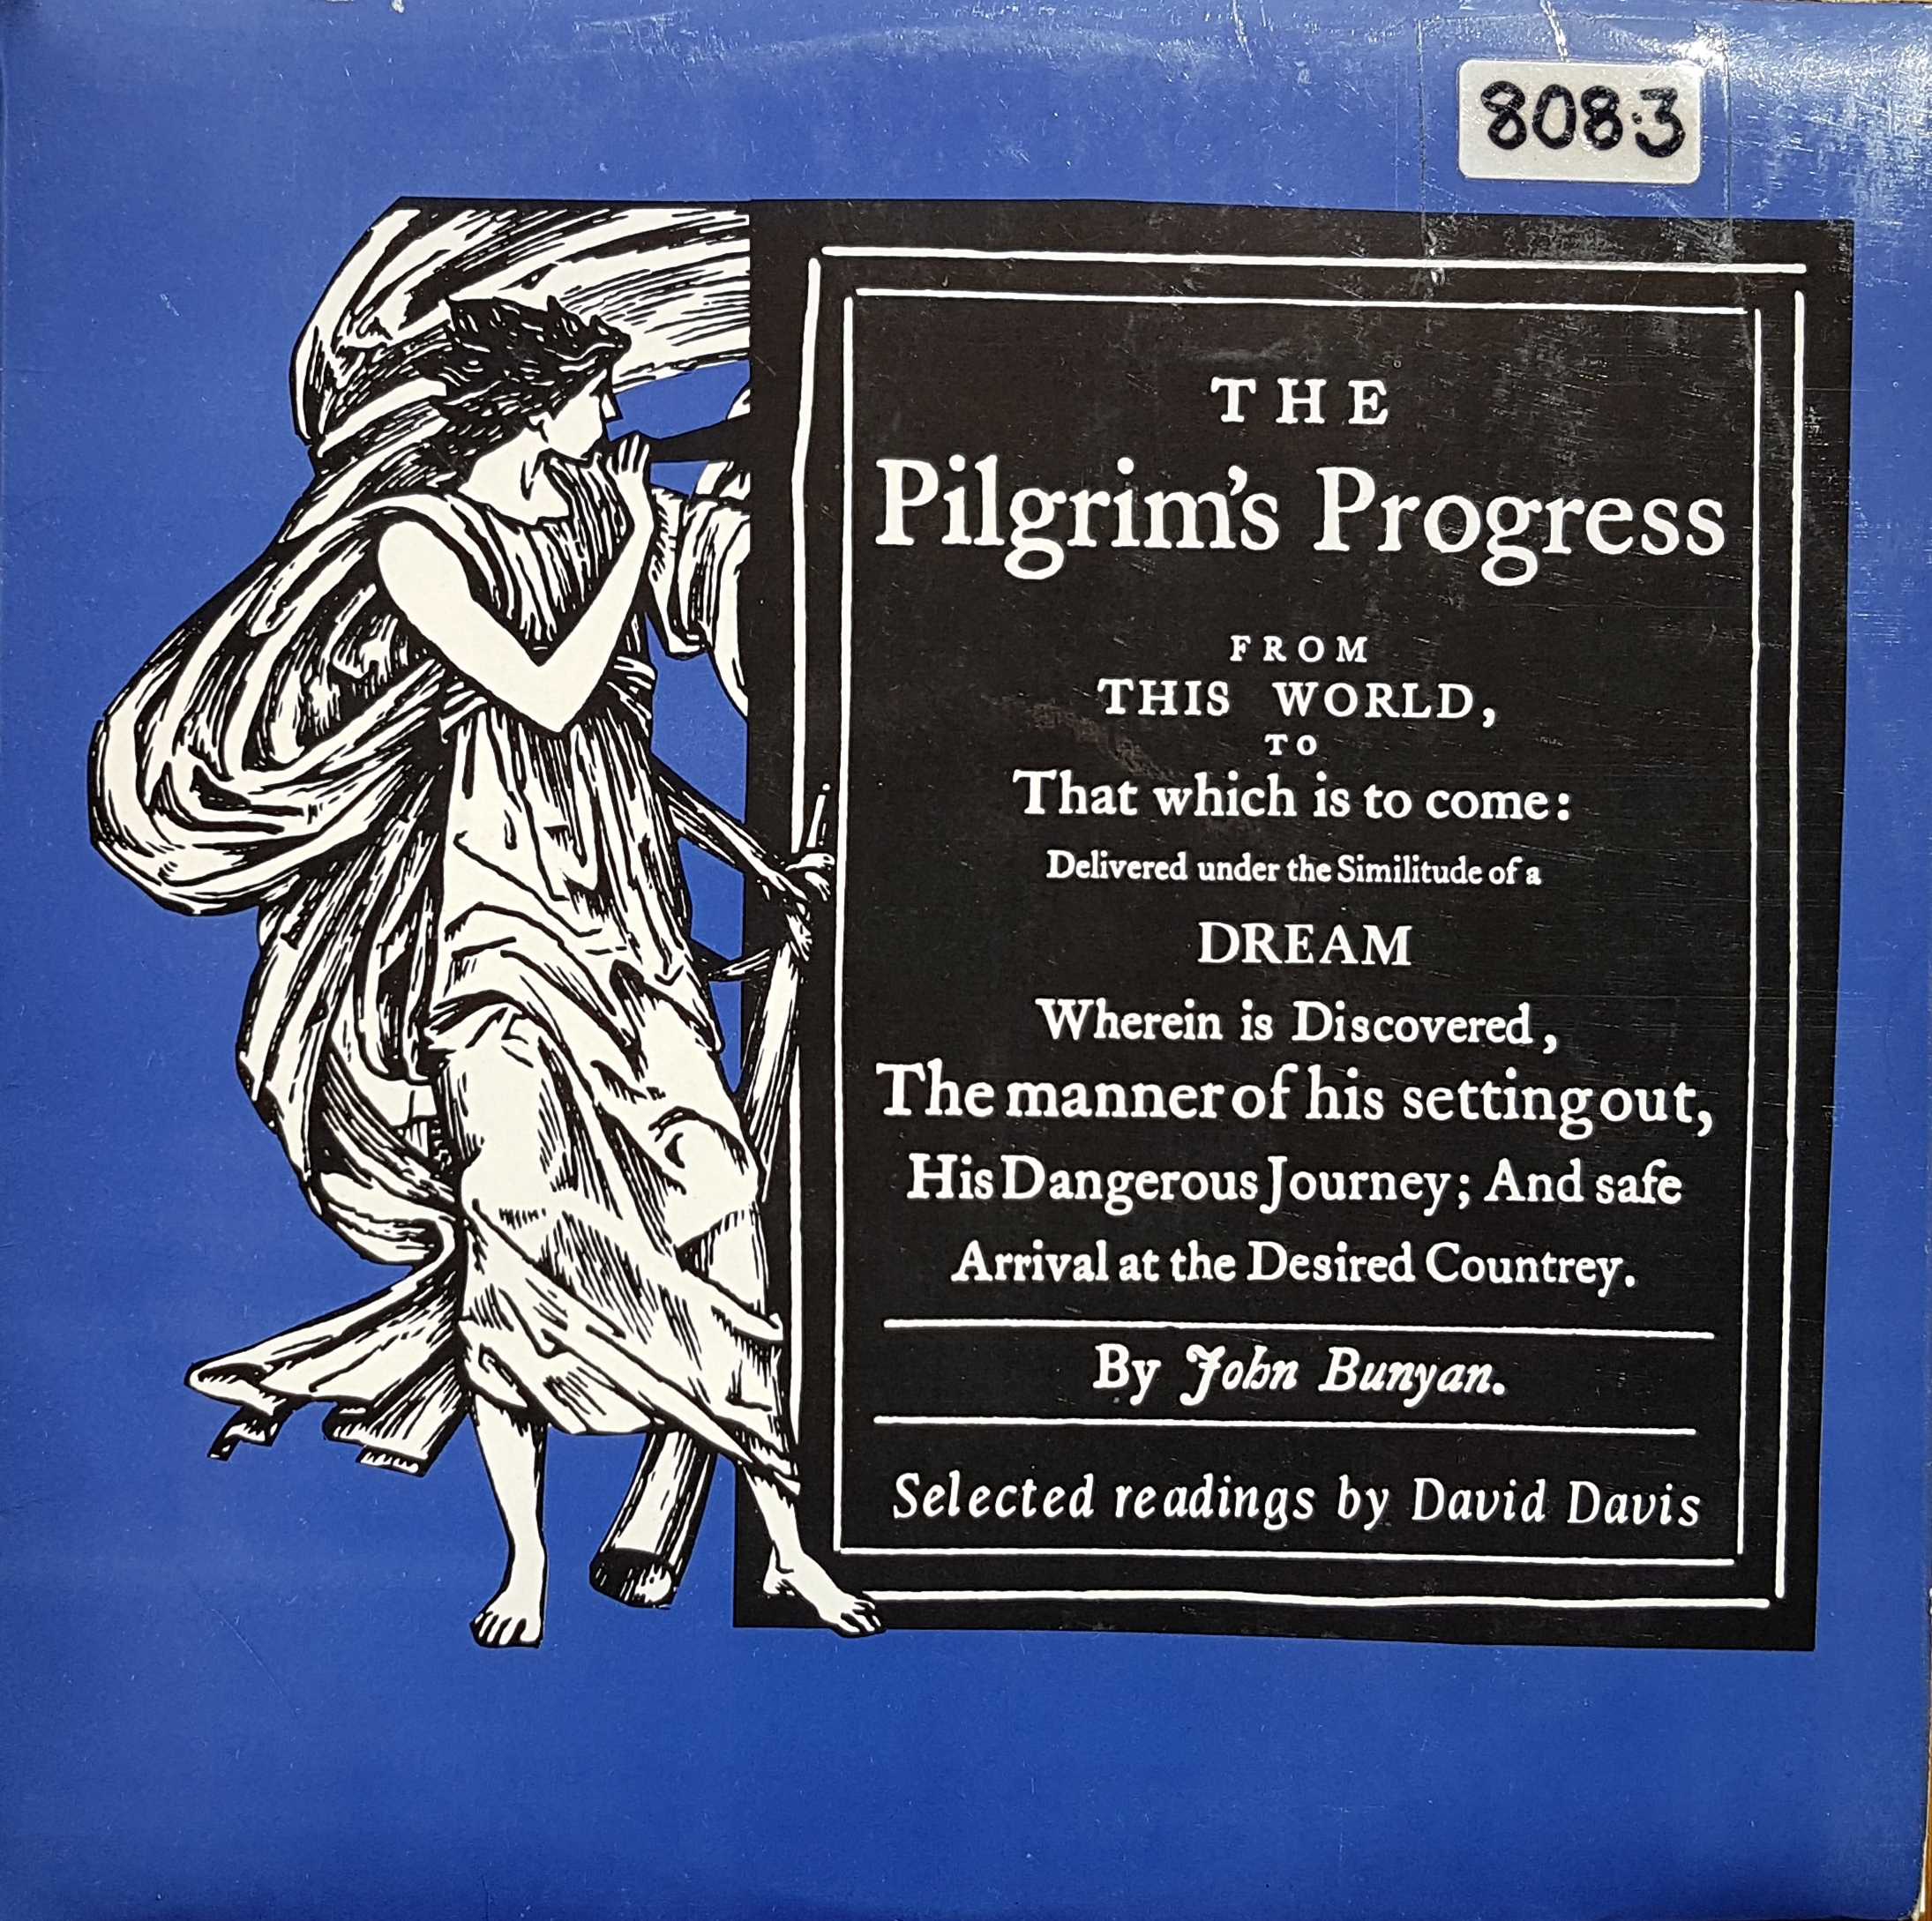 Picture of Pilgrim's Progress by artist John Bunyan / David Davis from the BBC albums - Records and Tapes library